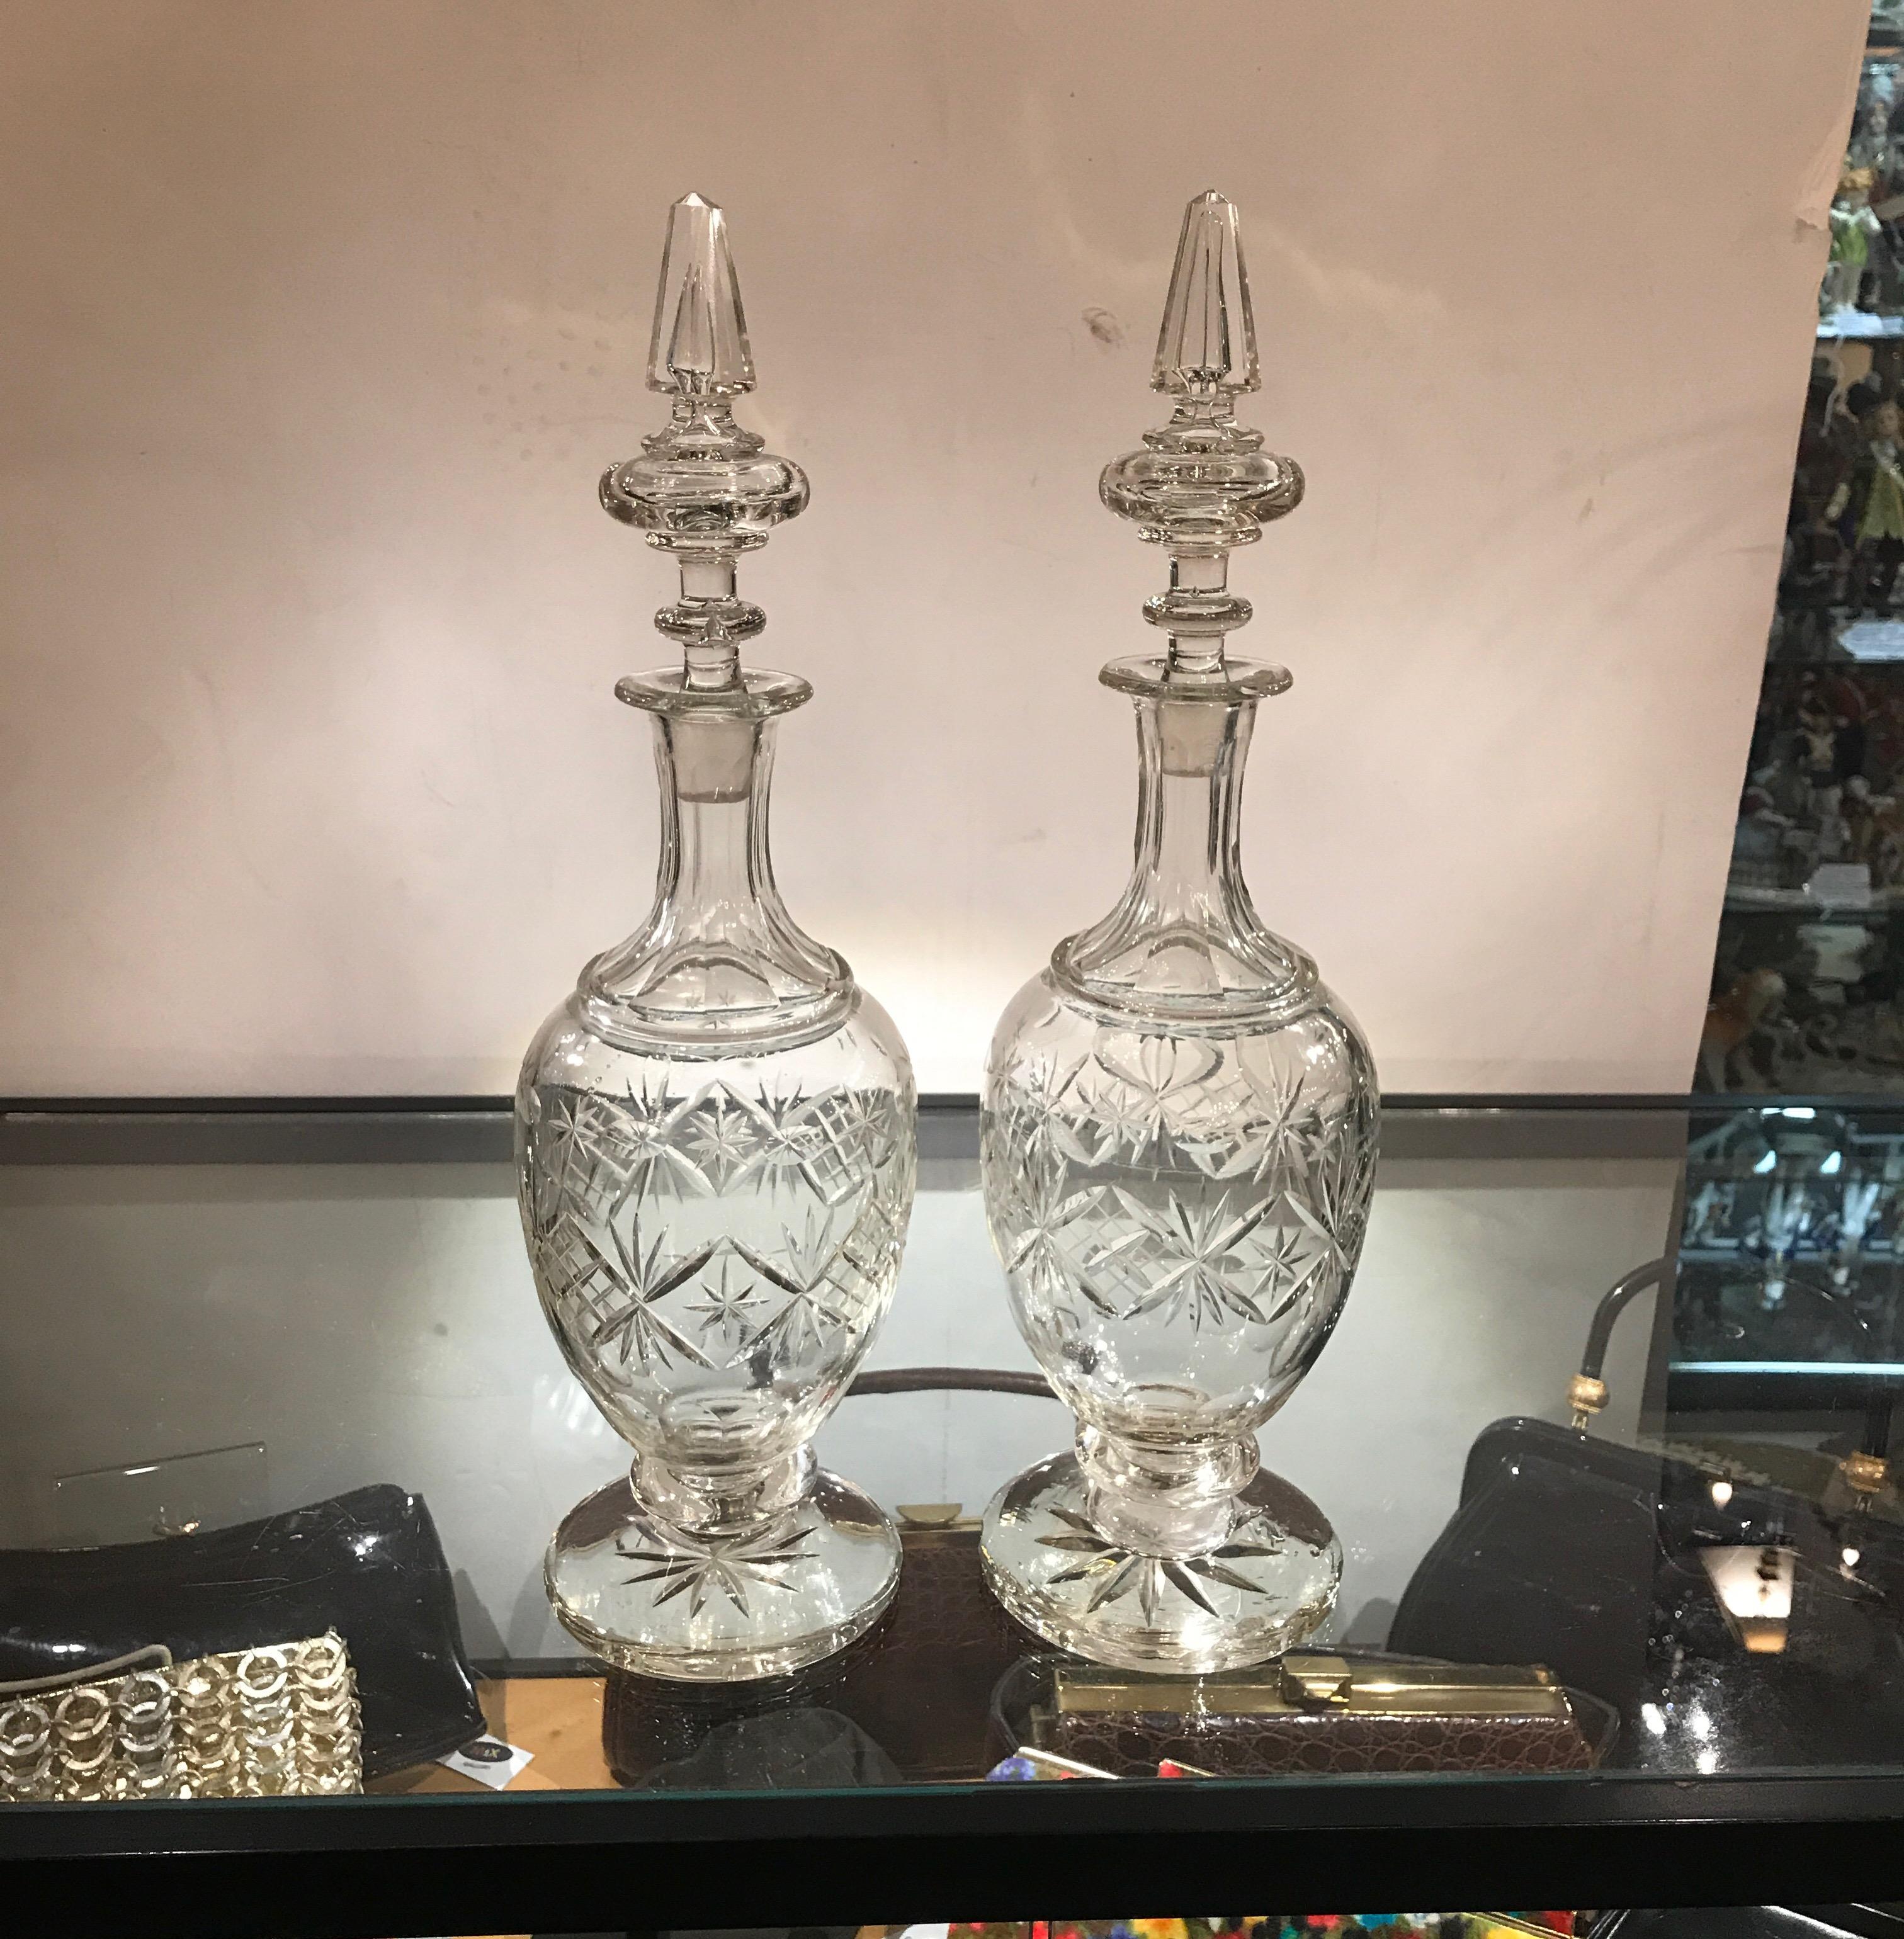 A pair of 19th century European cut glass decanters with spire stoppers. The speared panel cut tops with bulbous cut glass bottles on pedestal bases.